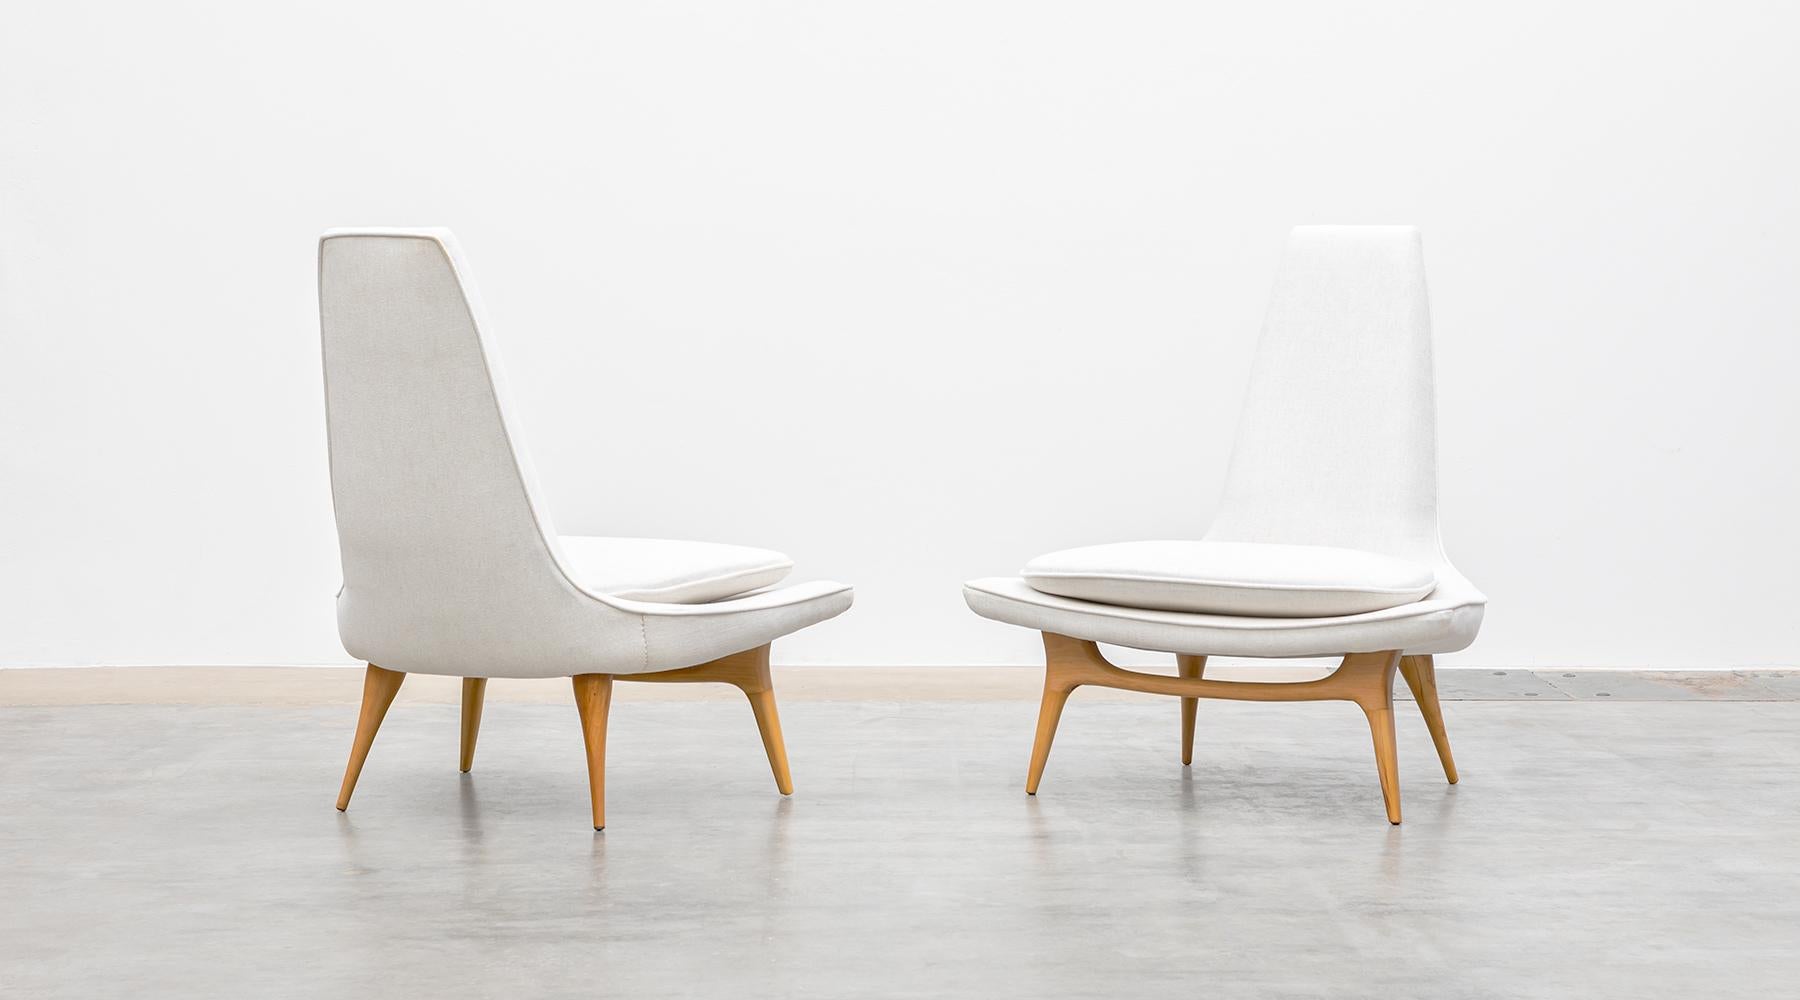 Matching pair of lounge chairs, white fabric, new upholstery, USA, 1950s.

Sculptural pair of lounge chairs by Karpen, circa early 1950s. These lovely examples have subtly curved seats and tall tapered backs with beautifully formed light wooden